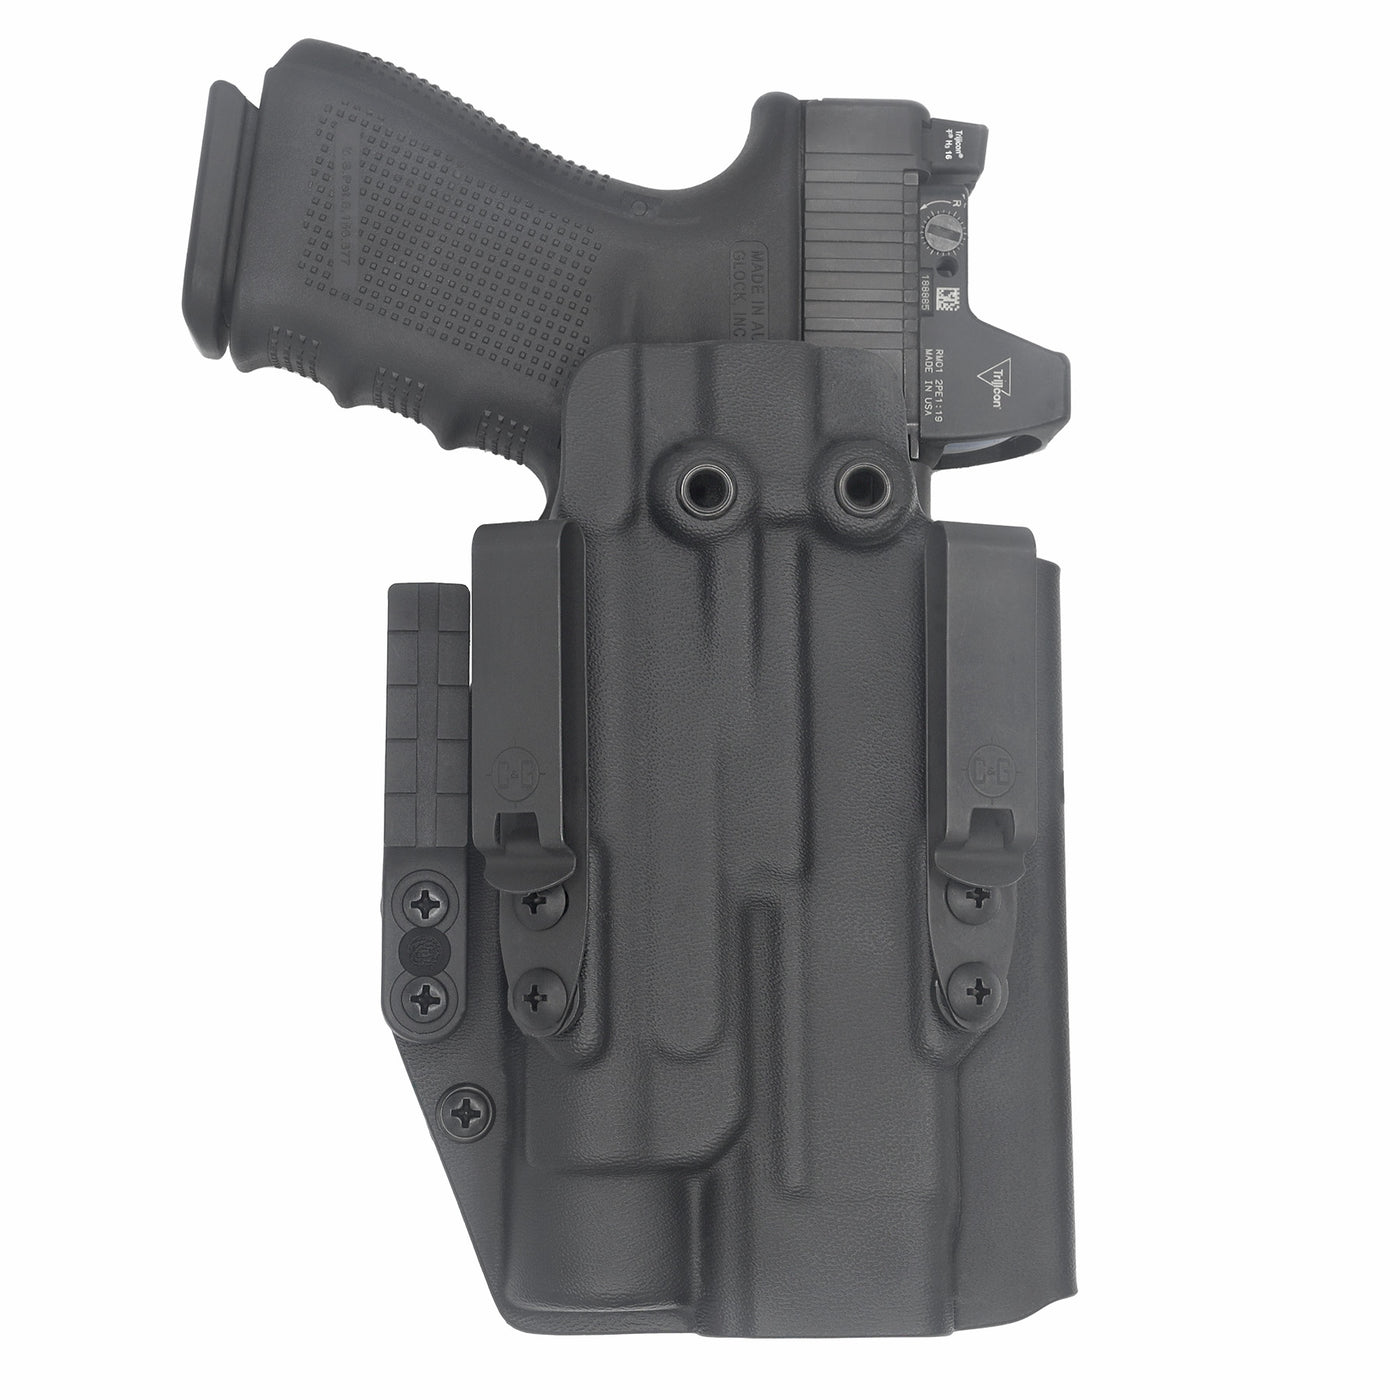 C&G Holsters quickship IWB Tactical ALPHA UPGRADE CZ P10/c Streamlight TLR-1 in holstered position